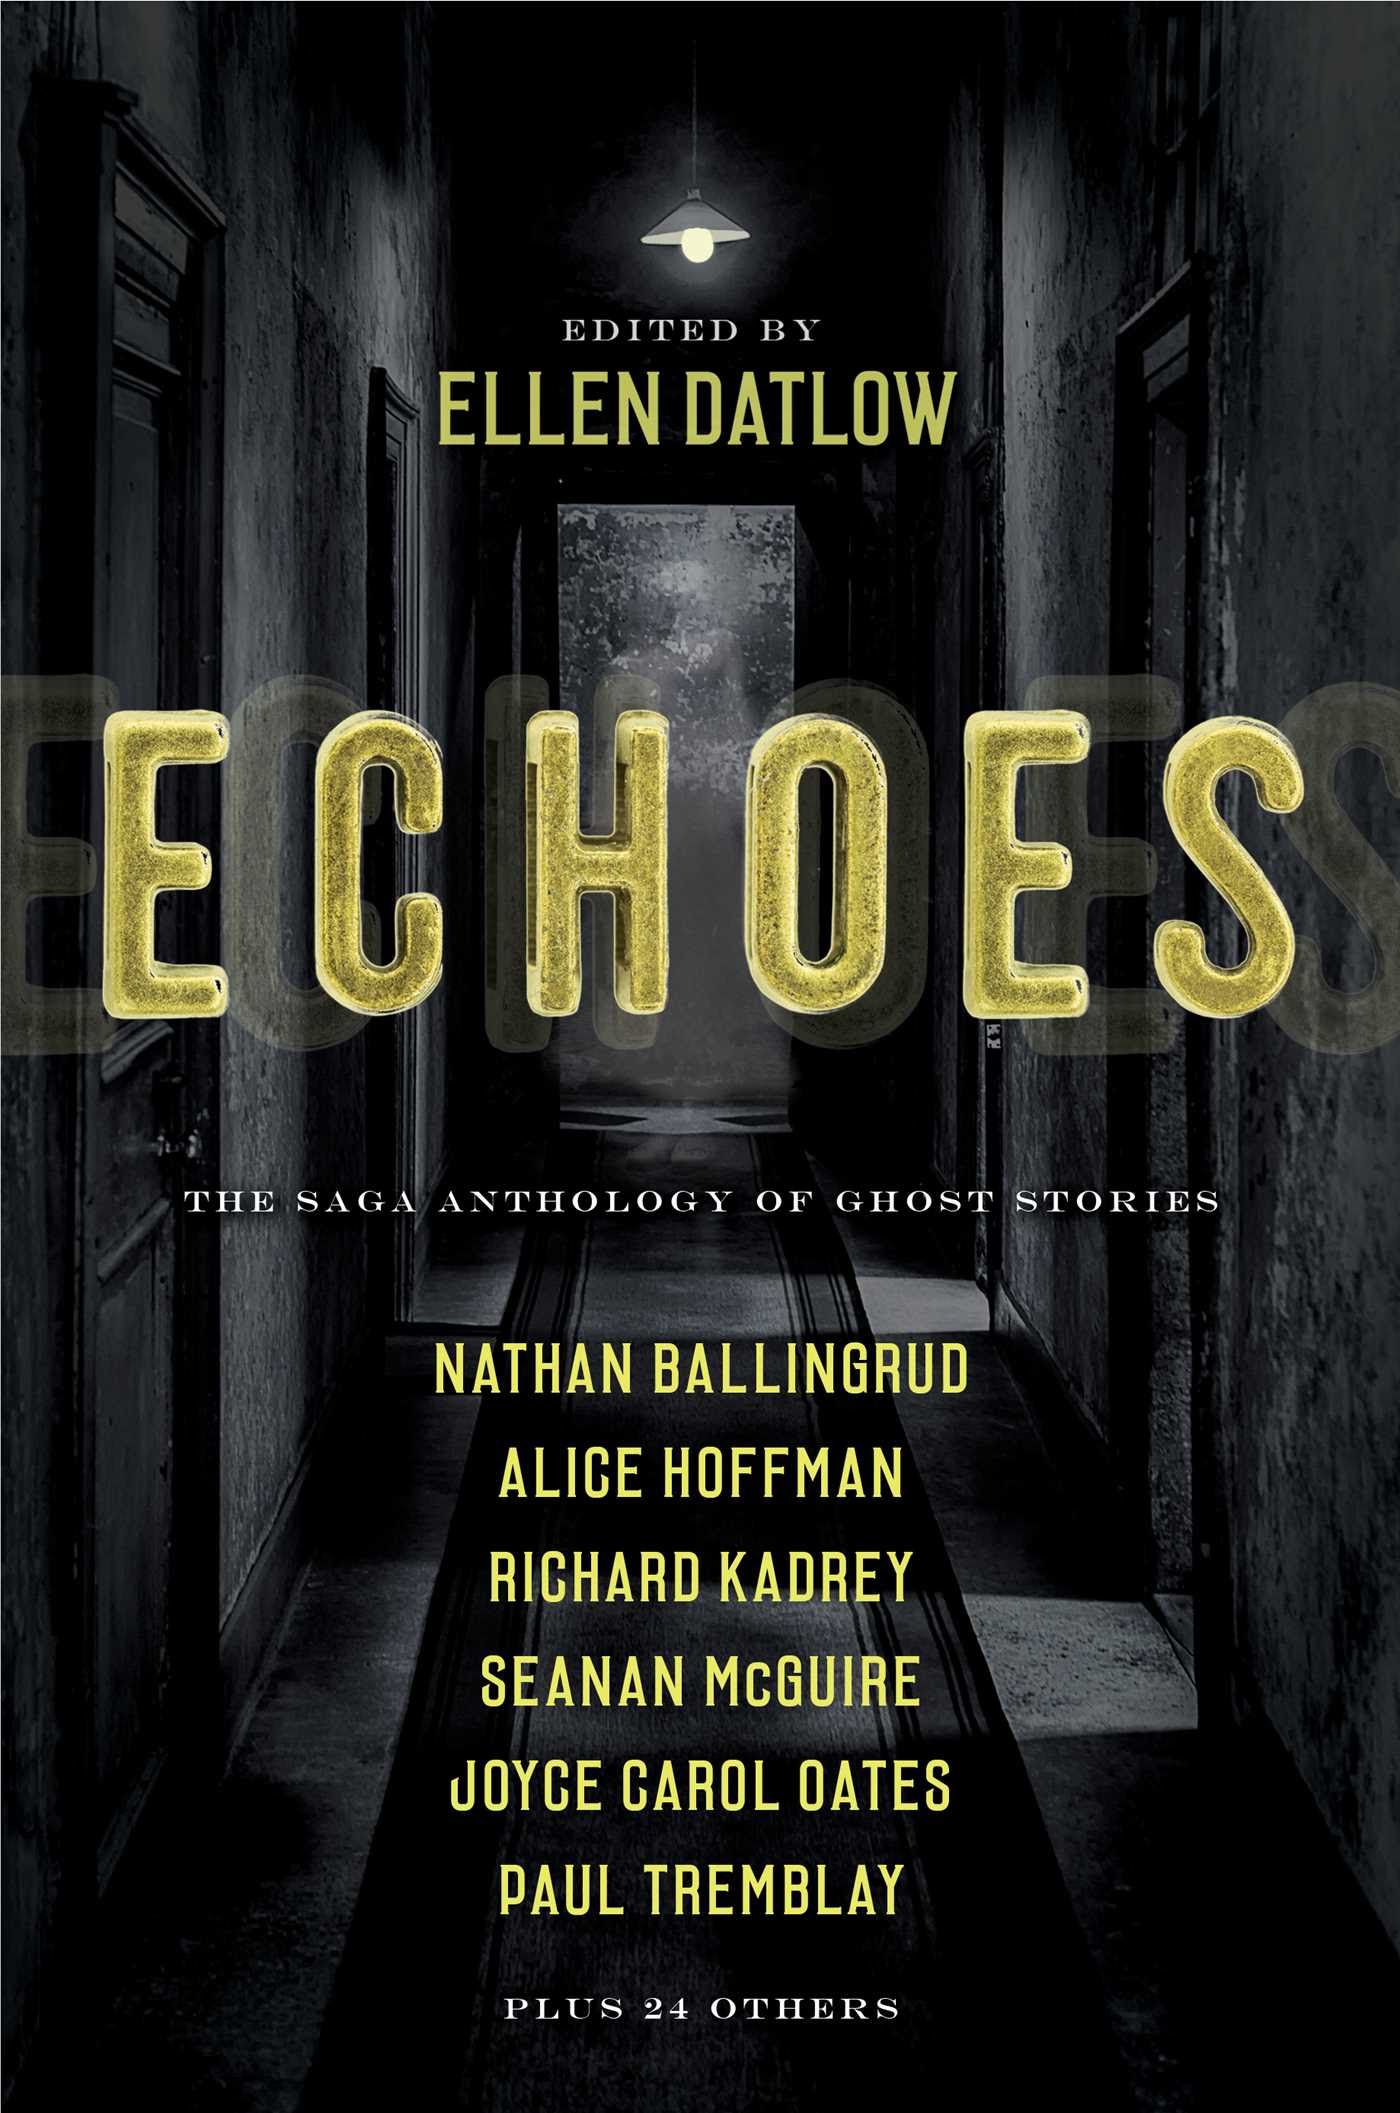 Echoes: The Saga Anthology of Ghost Stories PDF